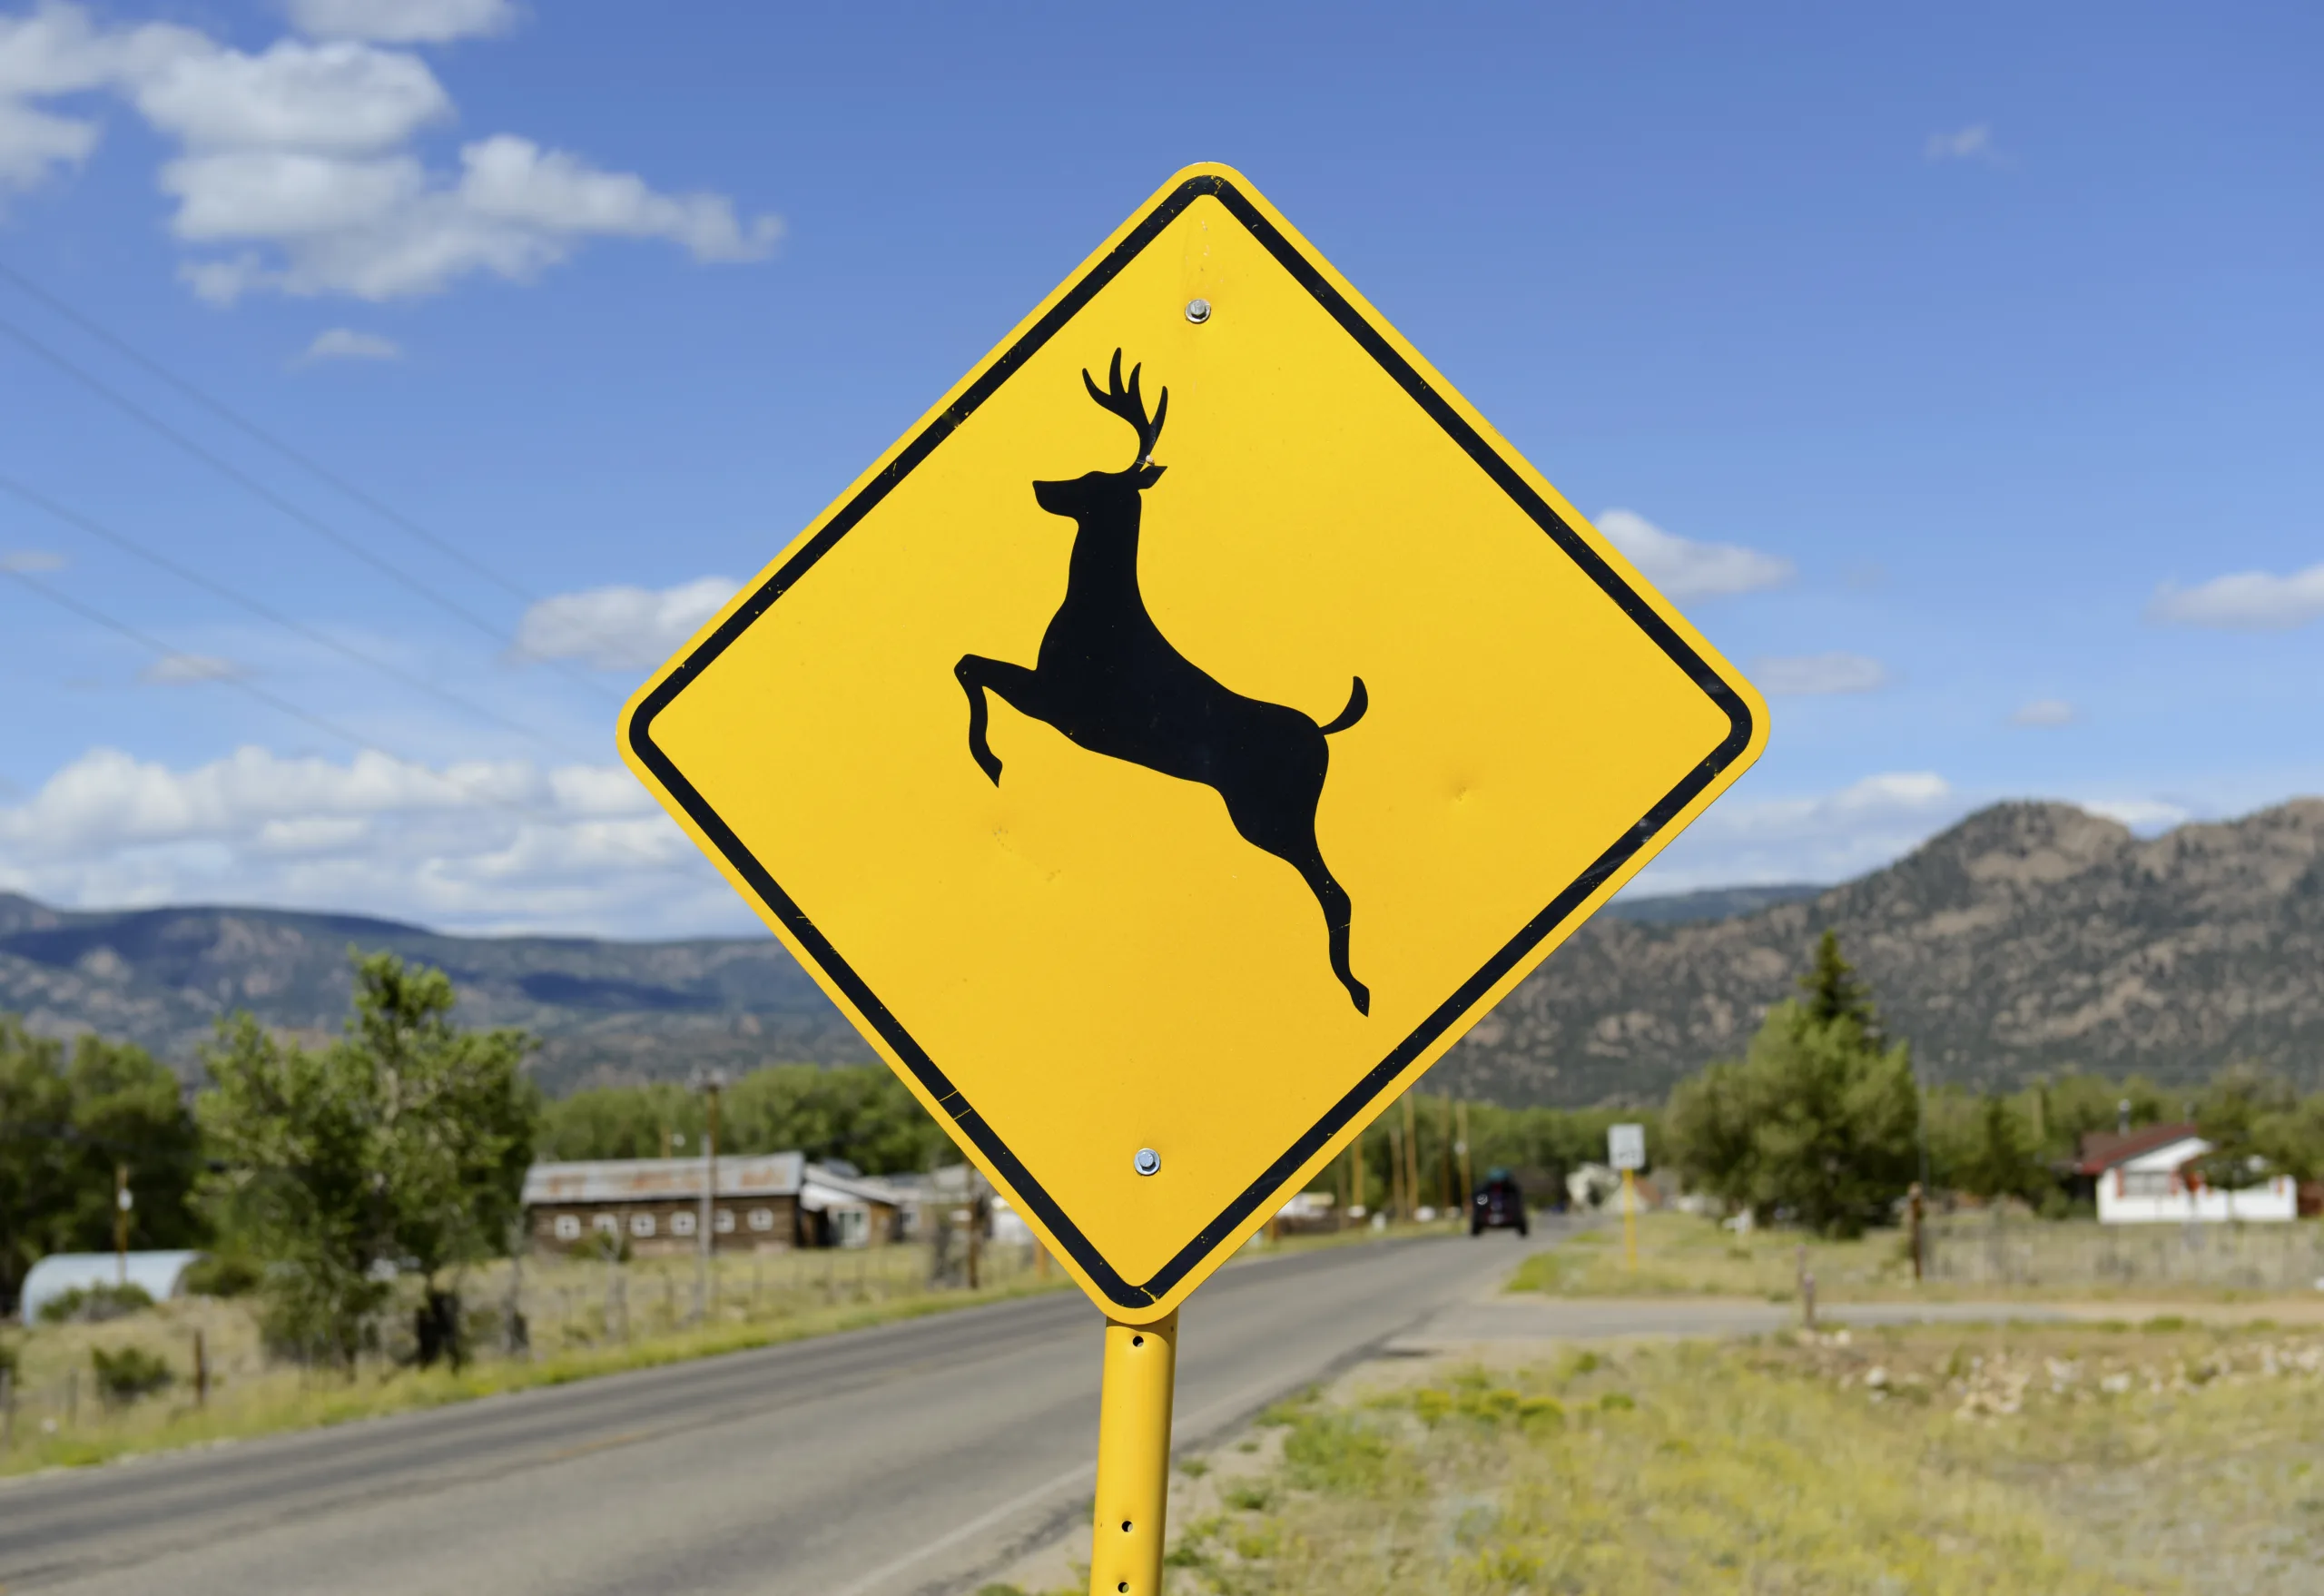 wildlife sign to be cautious of